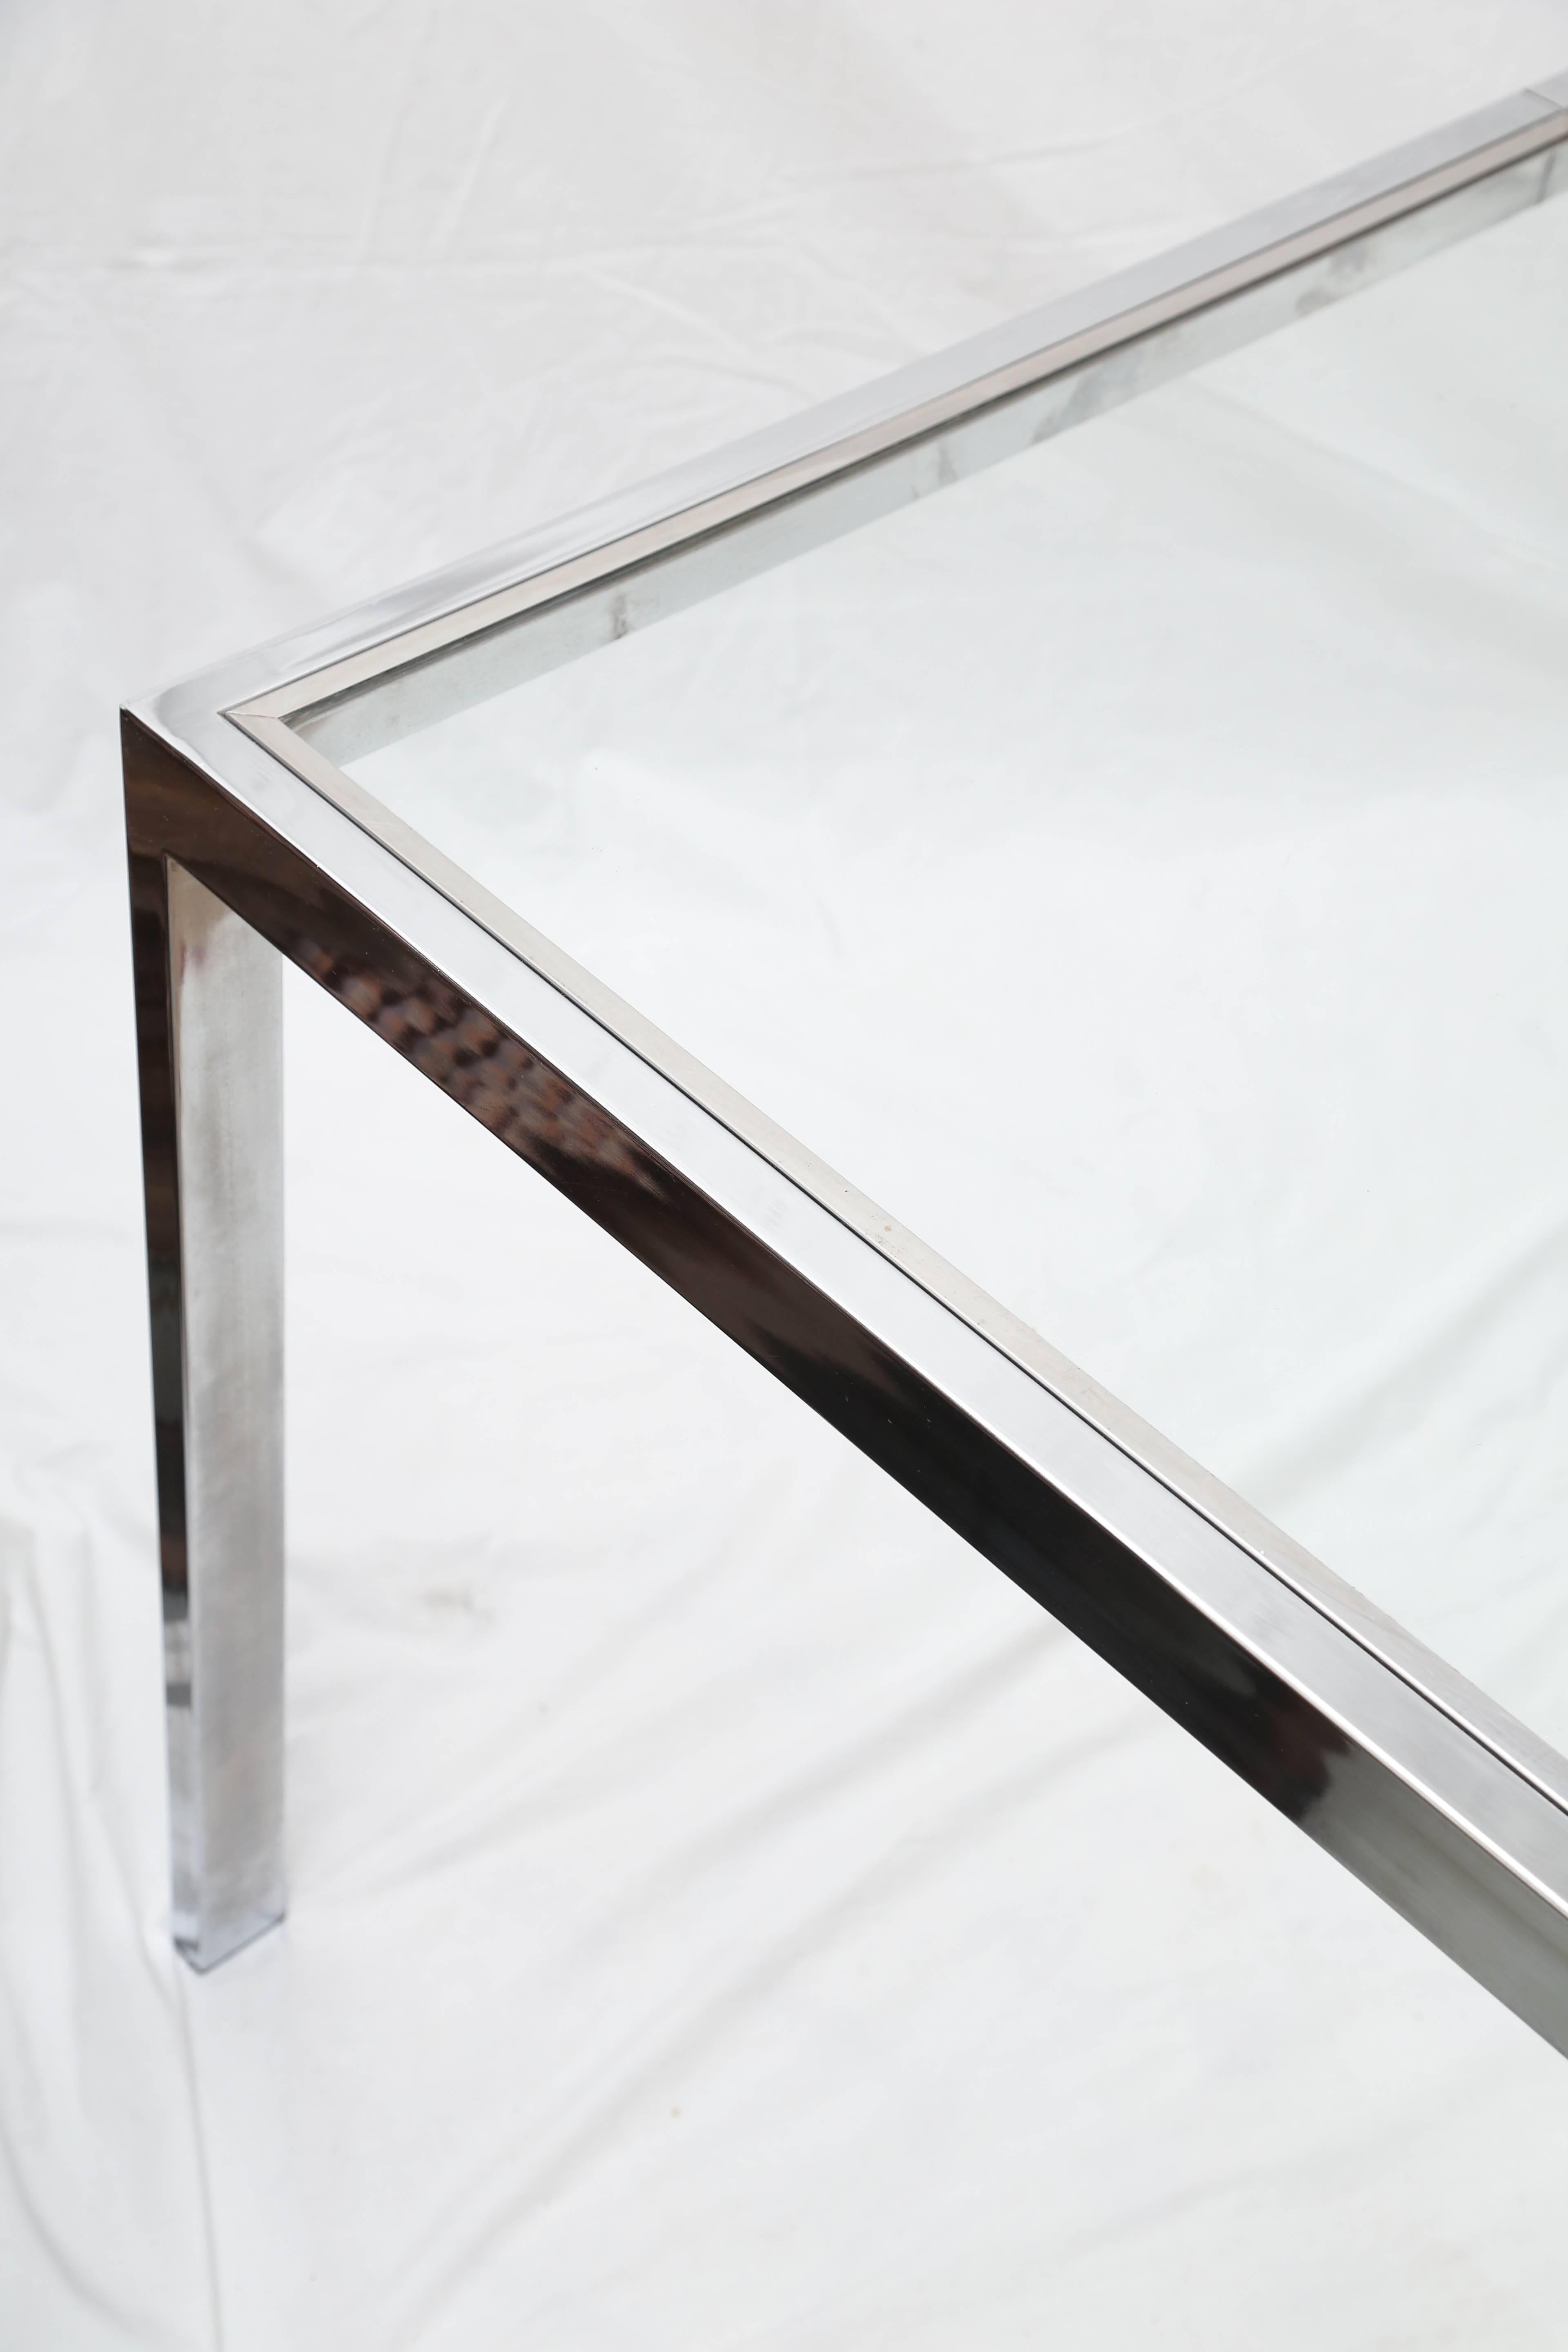 American Milo Baughman Chrome Dining Table with One Leaf, 1970s, USA